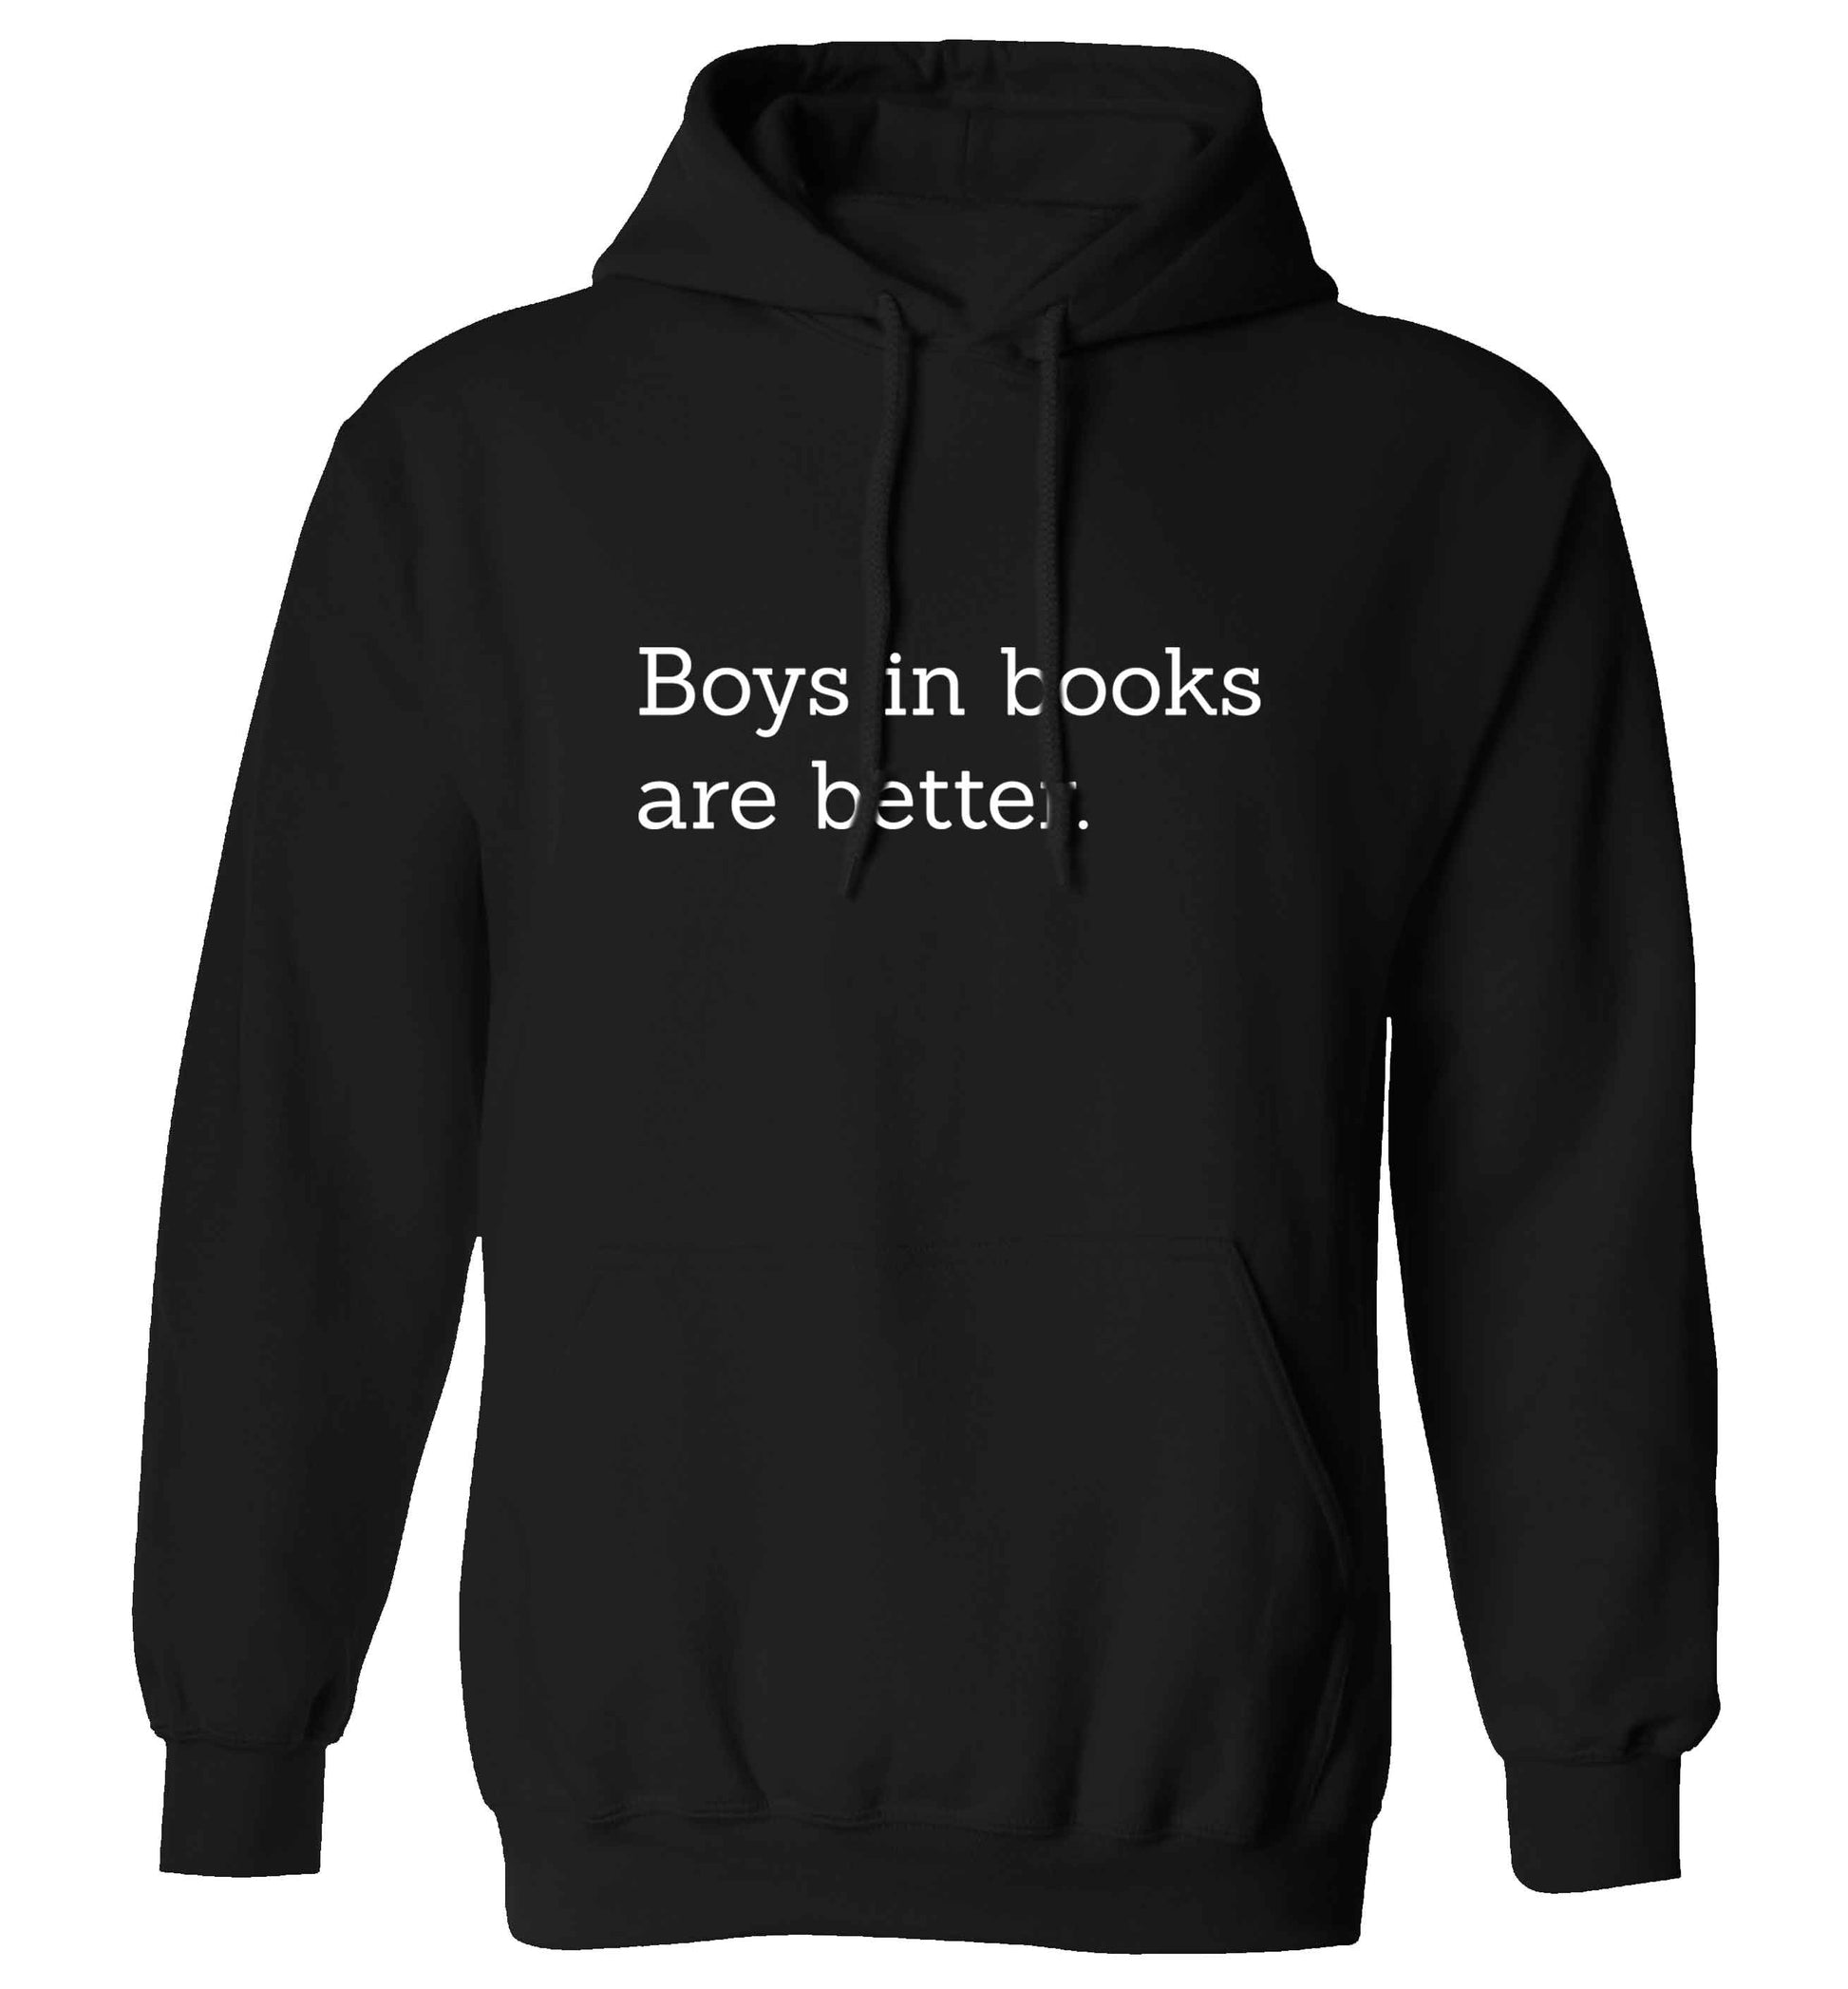 Boys in books are better adults unisex black hoodie 2XL